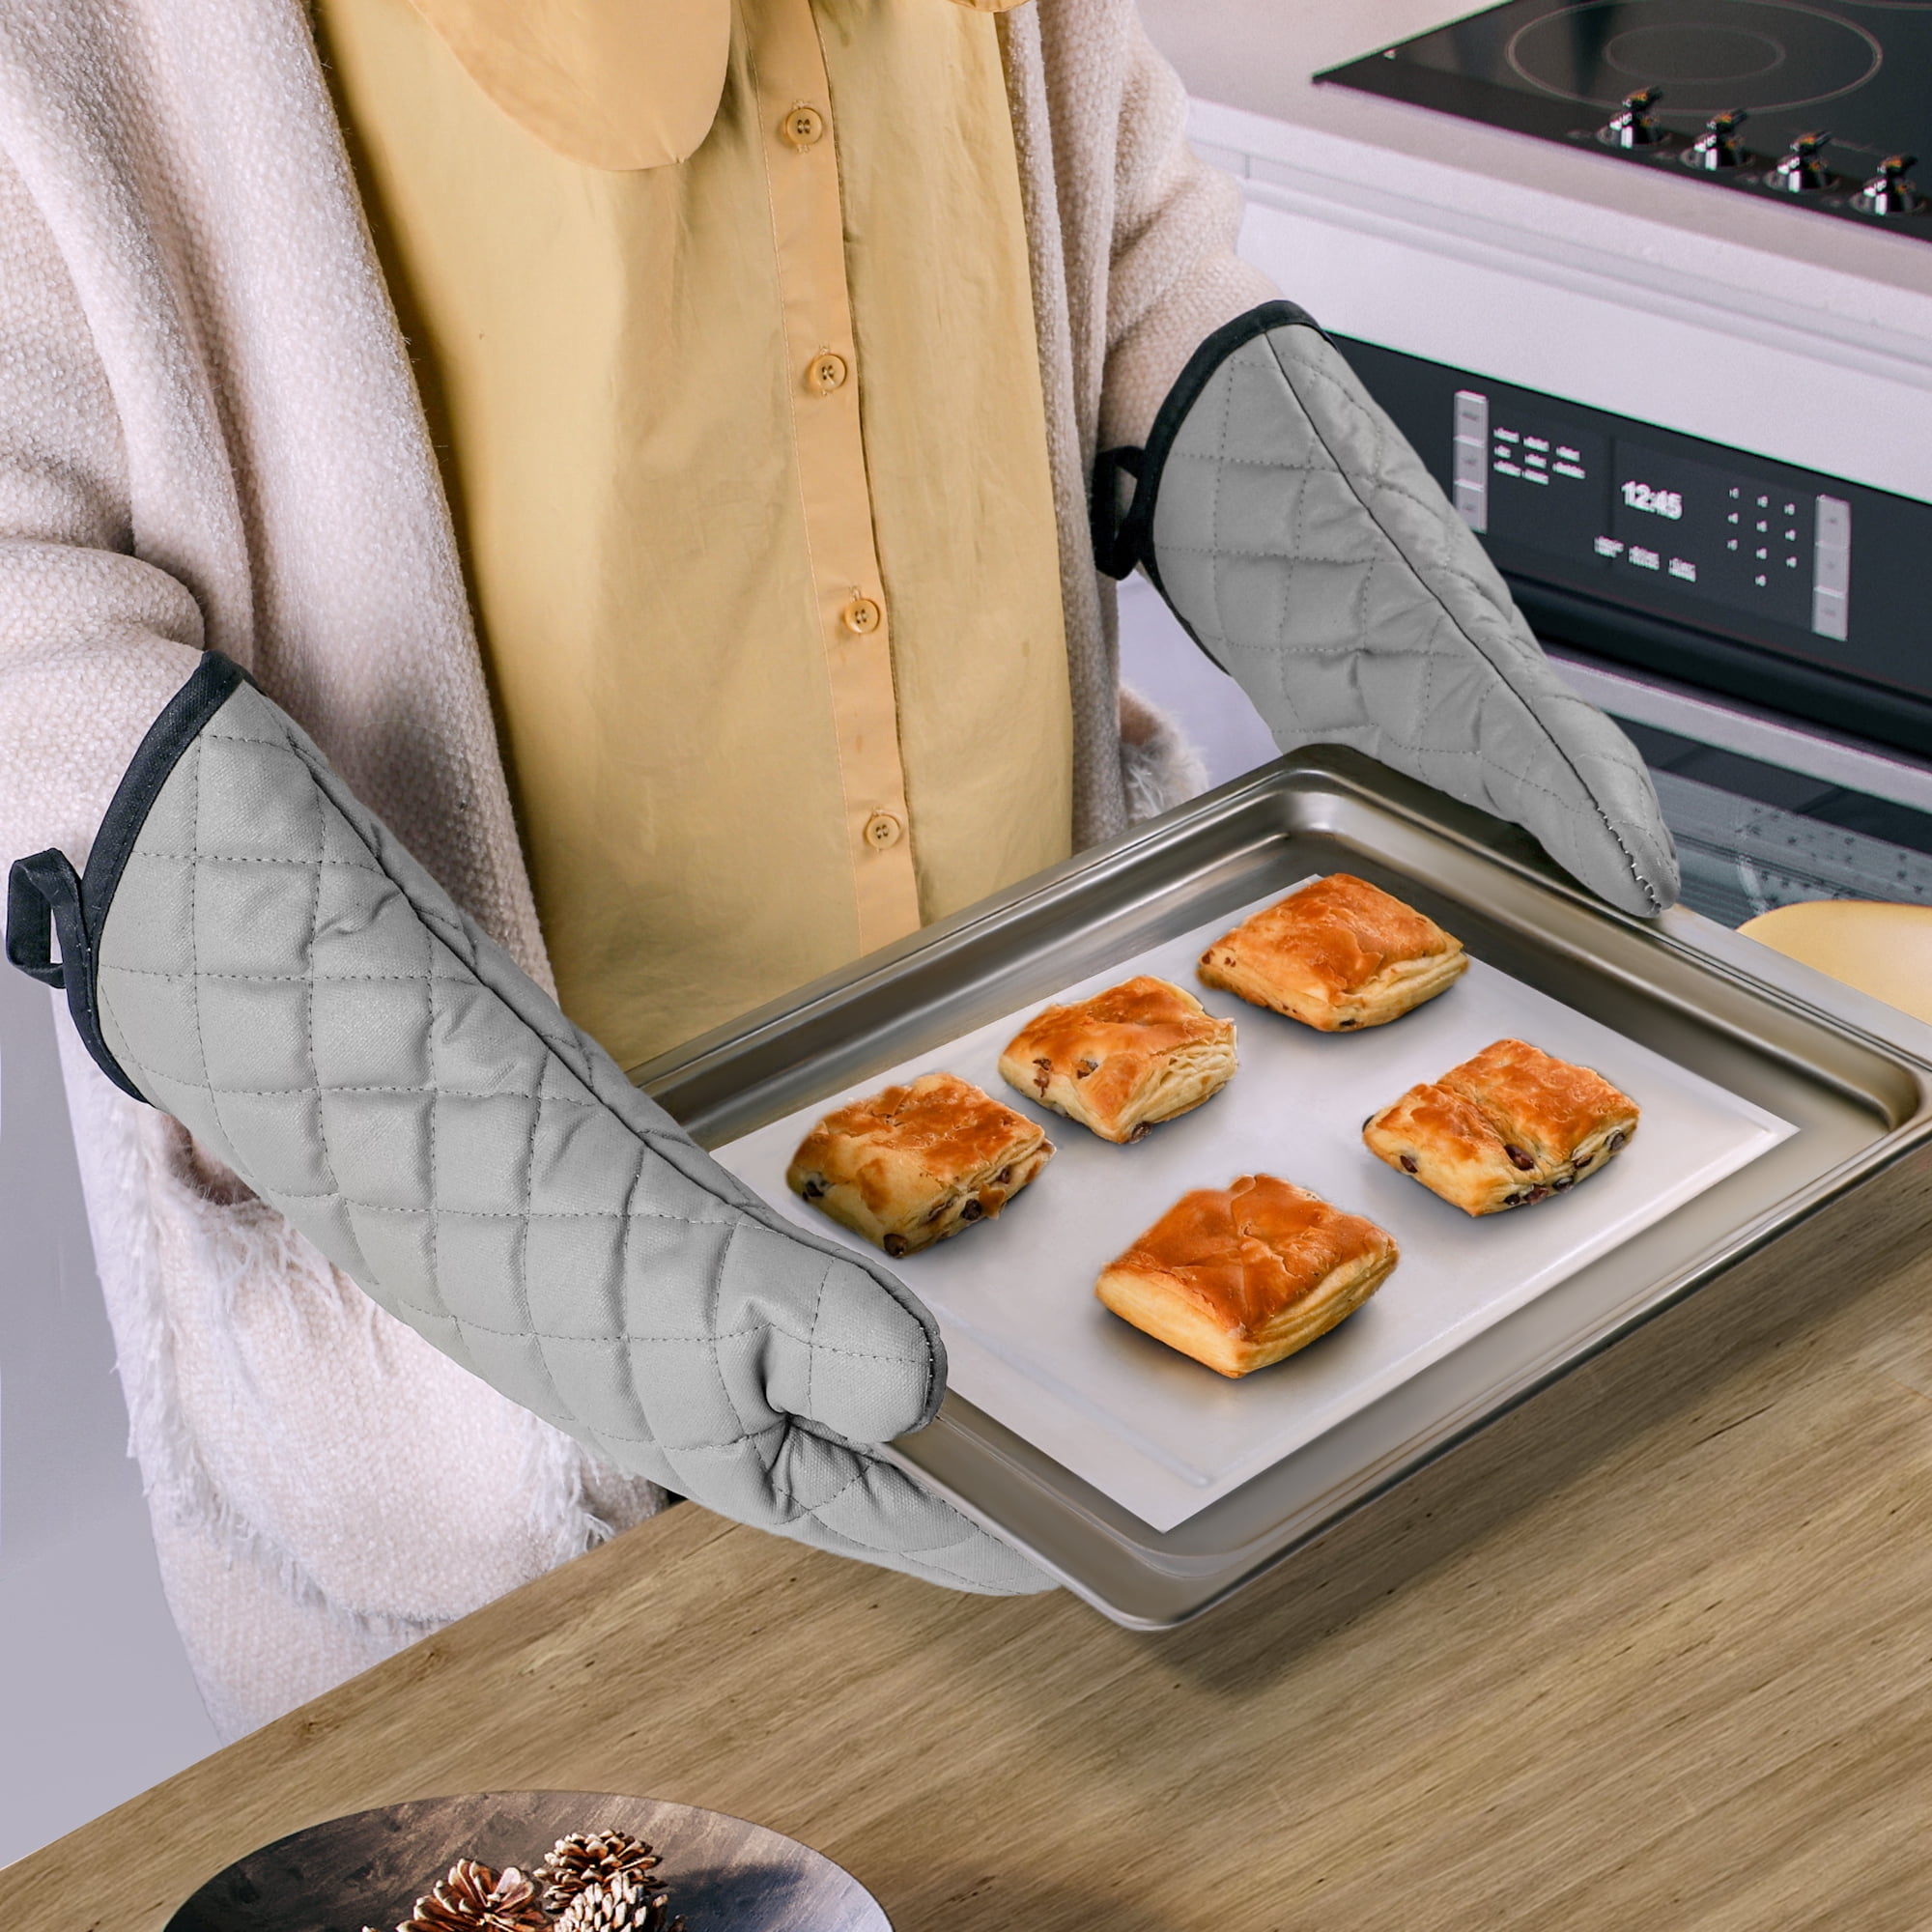 MEYONER Oven Mitts and Pot Holders Set 500 Degree Heat Resistant Oven Gloves and Hot Pads, Premium Soft Cotton Kitchen Hand Towels and Dish Cloth